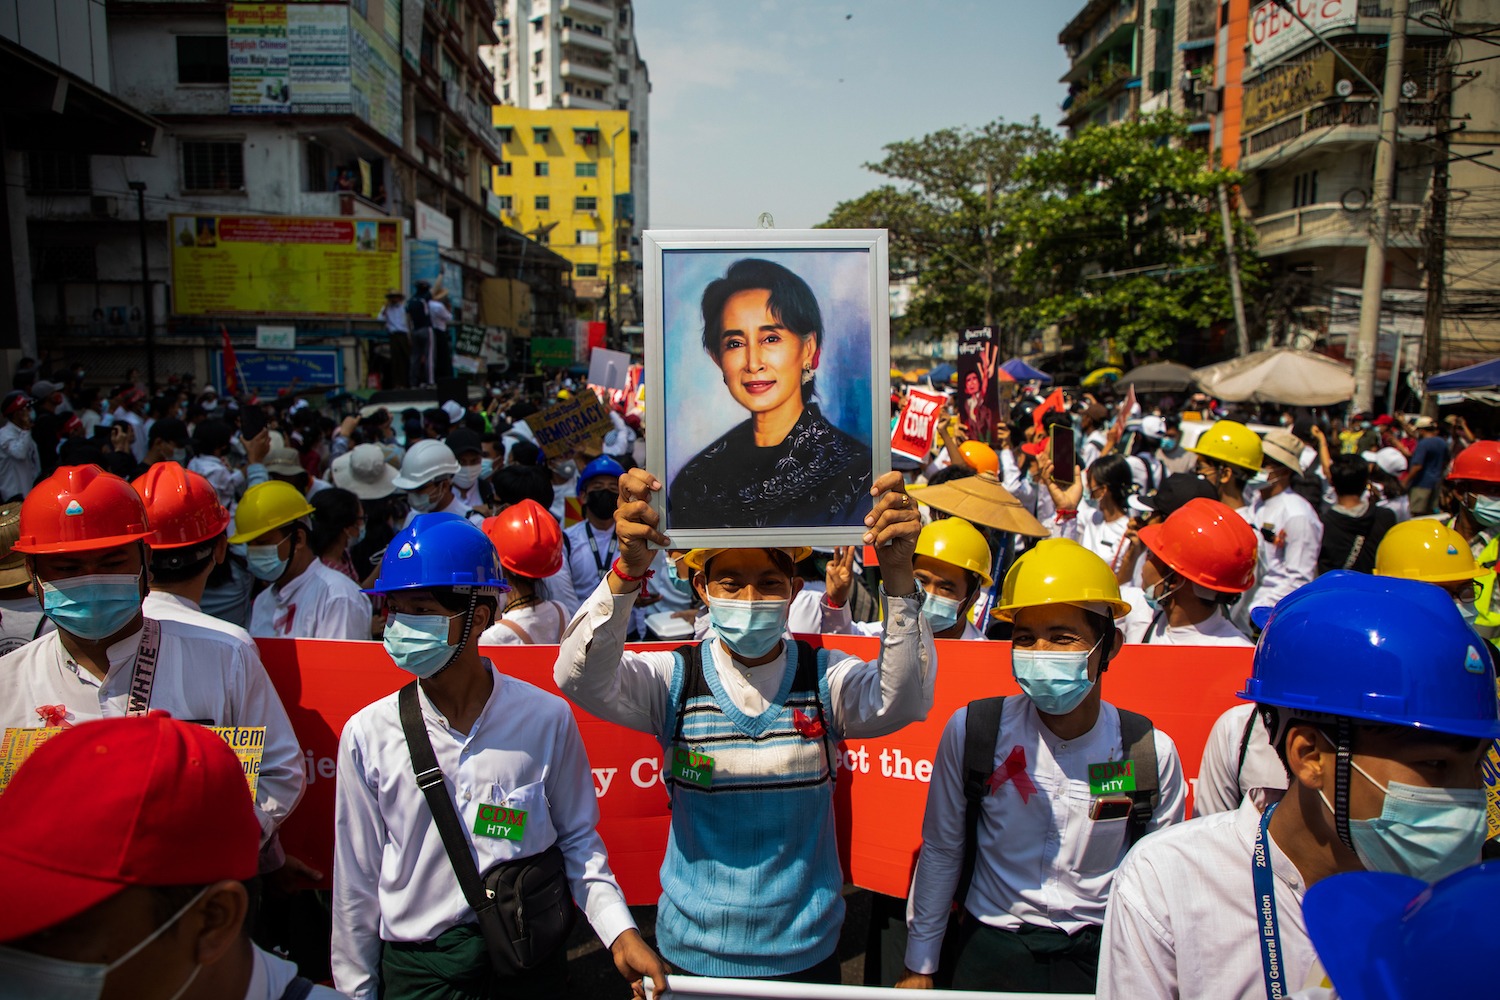 A protester holds a painting of Aung San Suu Kyi in Yangon during a demonstration against the junta in Yangon in February 2021. (Frontier)